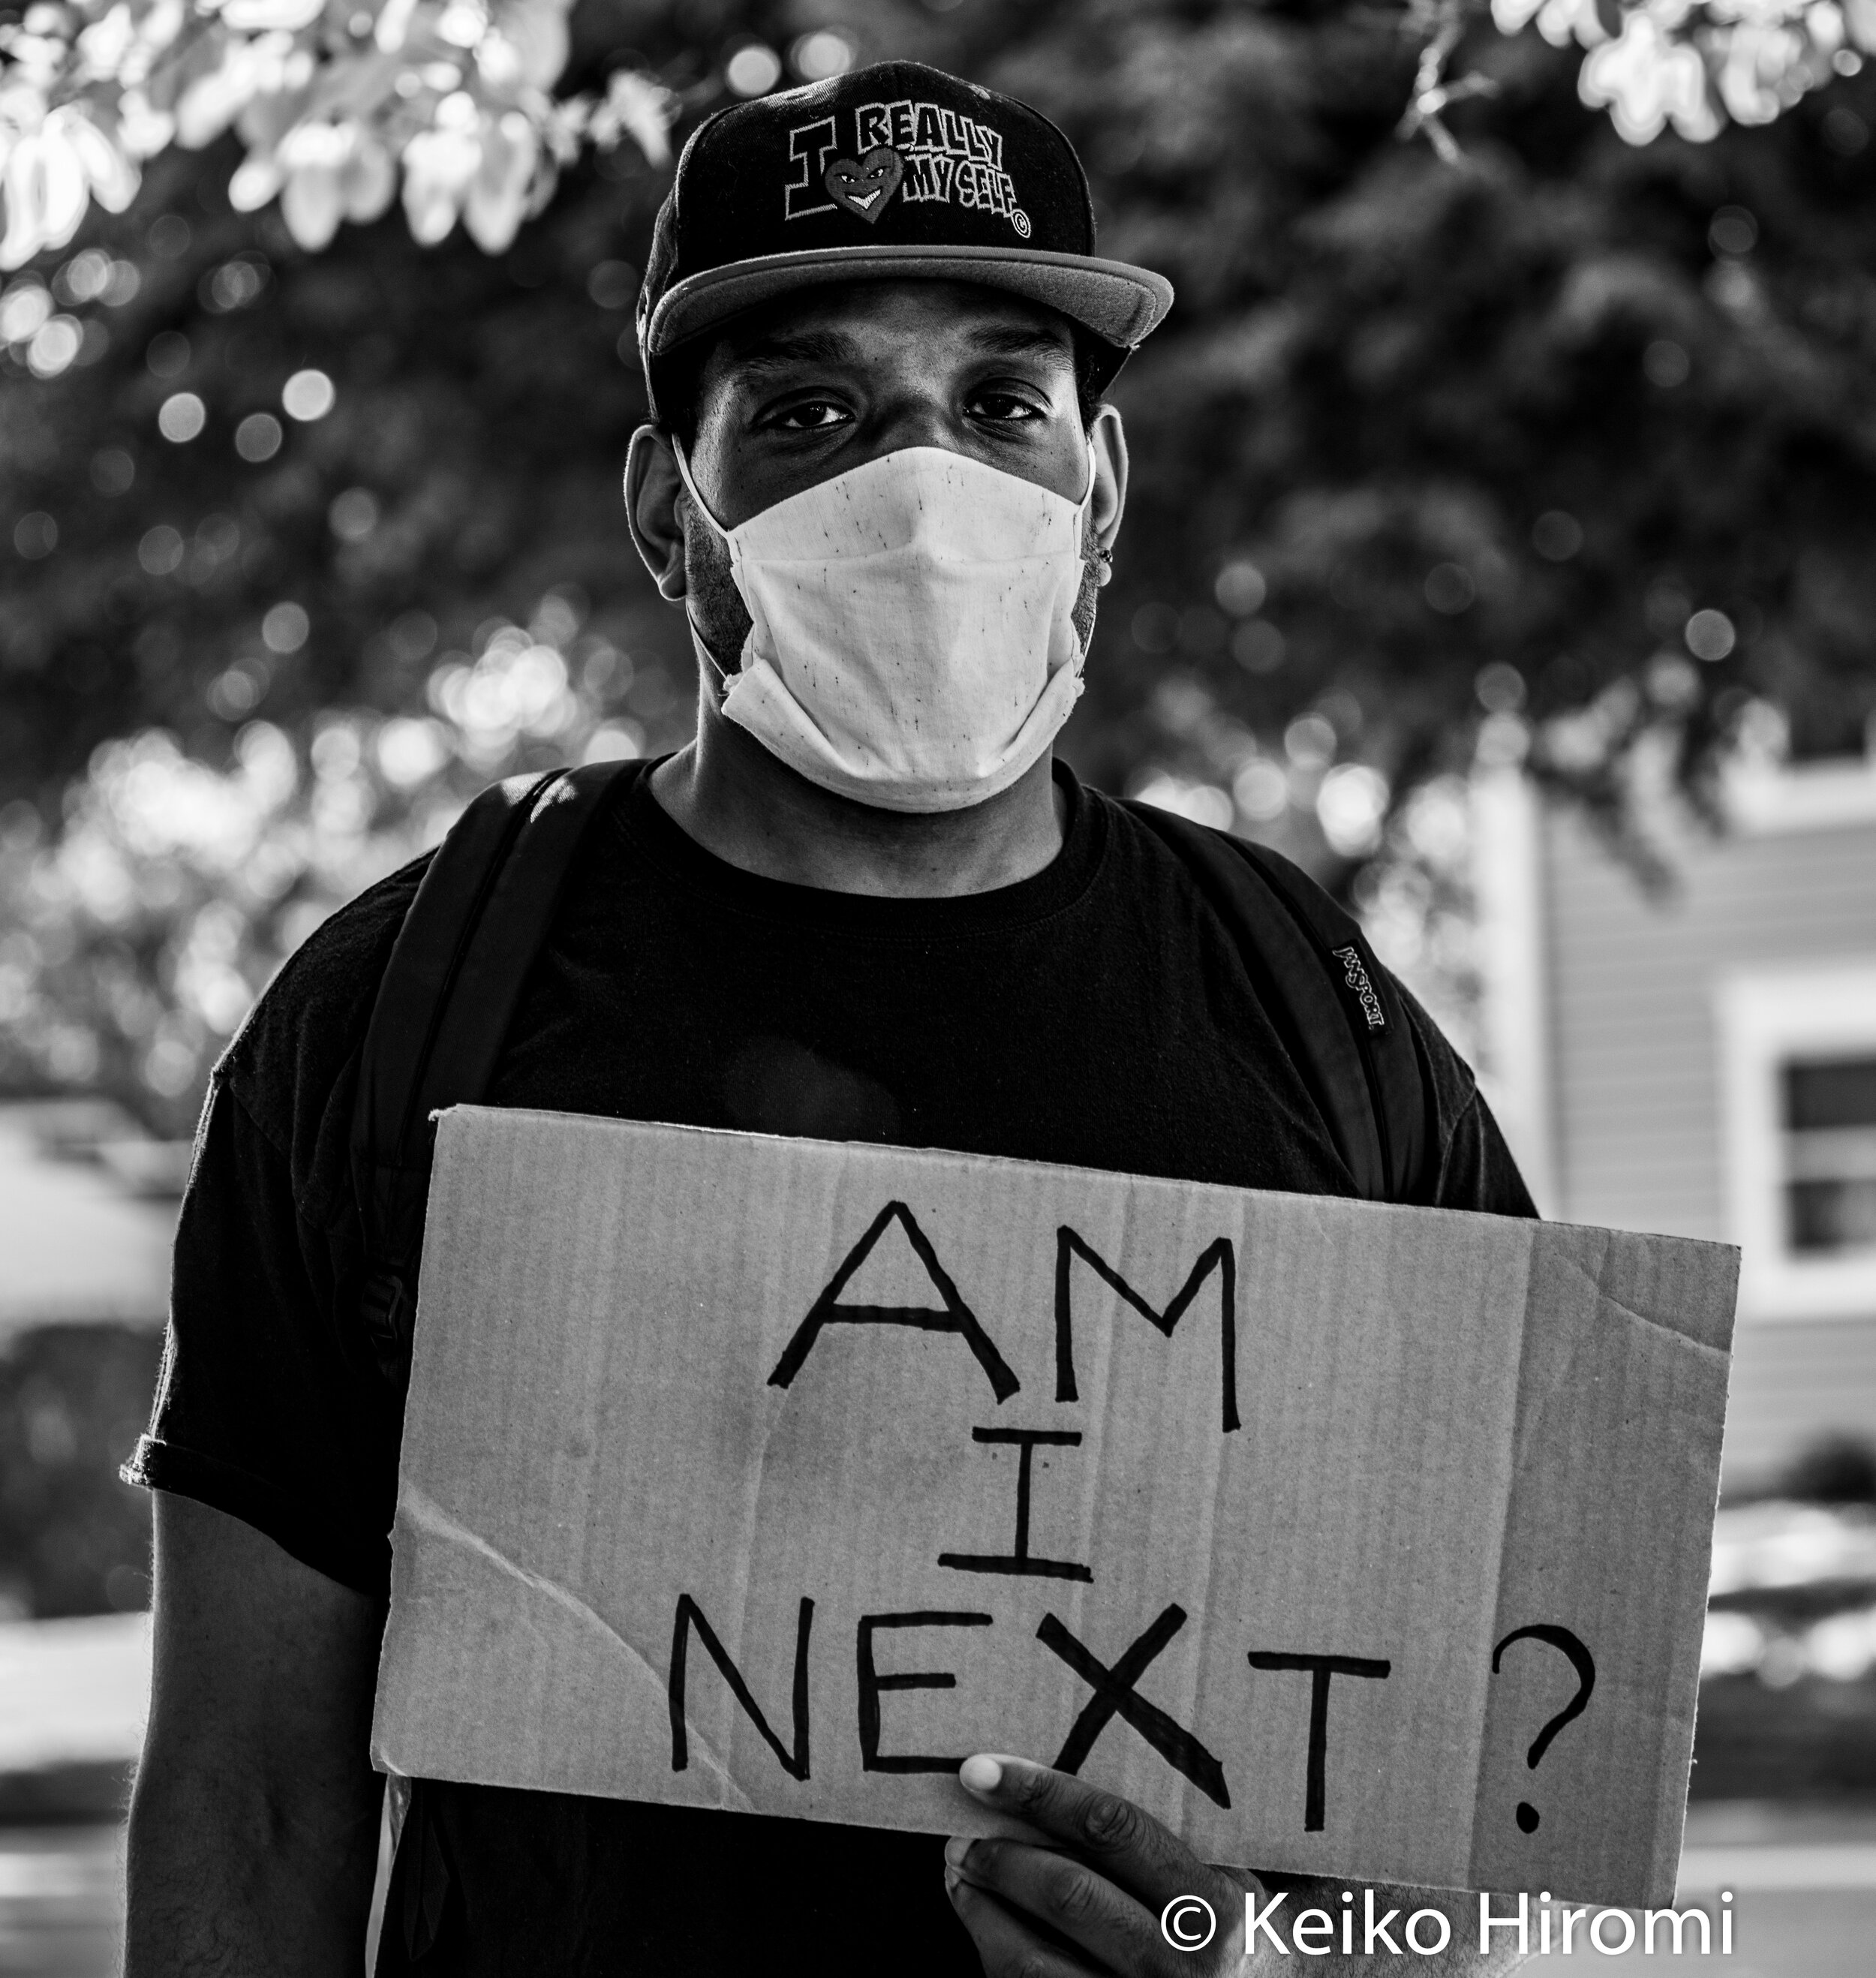  June 8, 2020, Lynnfield, Massachusetts, USA: A protester holds a sign "Am I next?" during a rally in response to deaths of George Floyd and against police brutality and racism in Lynnfield. 